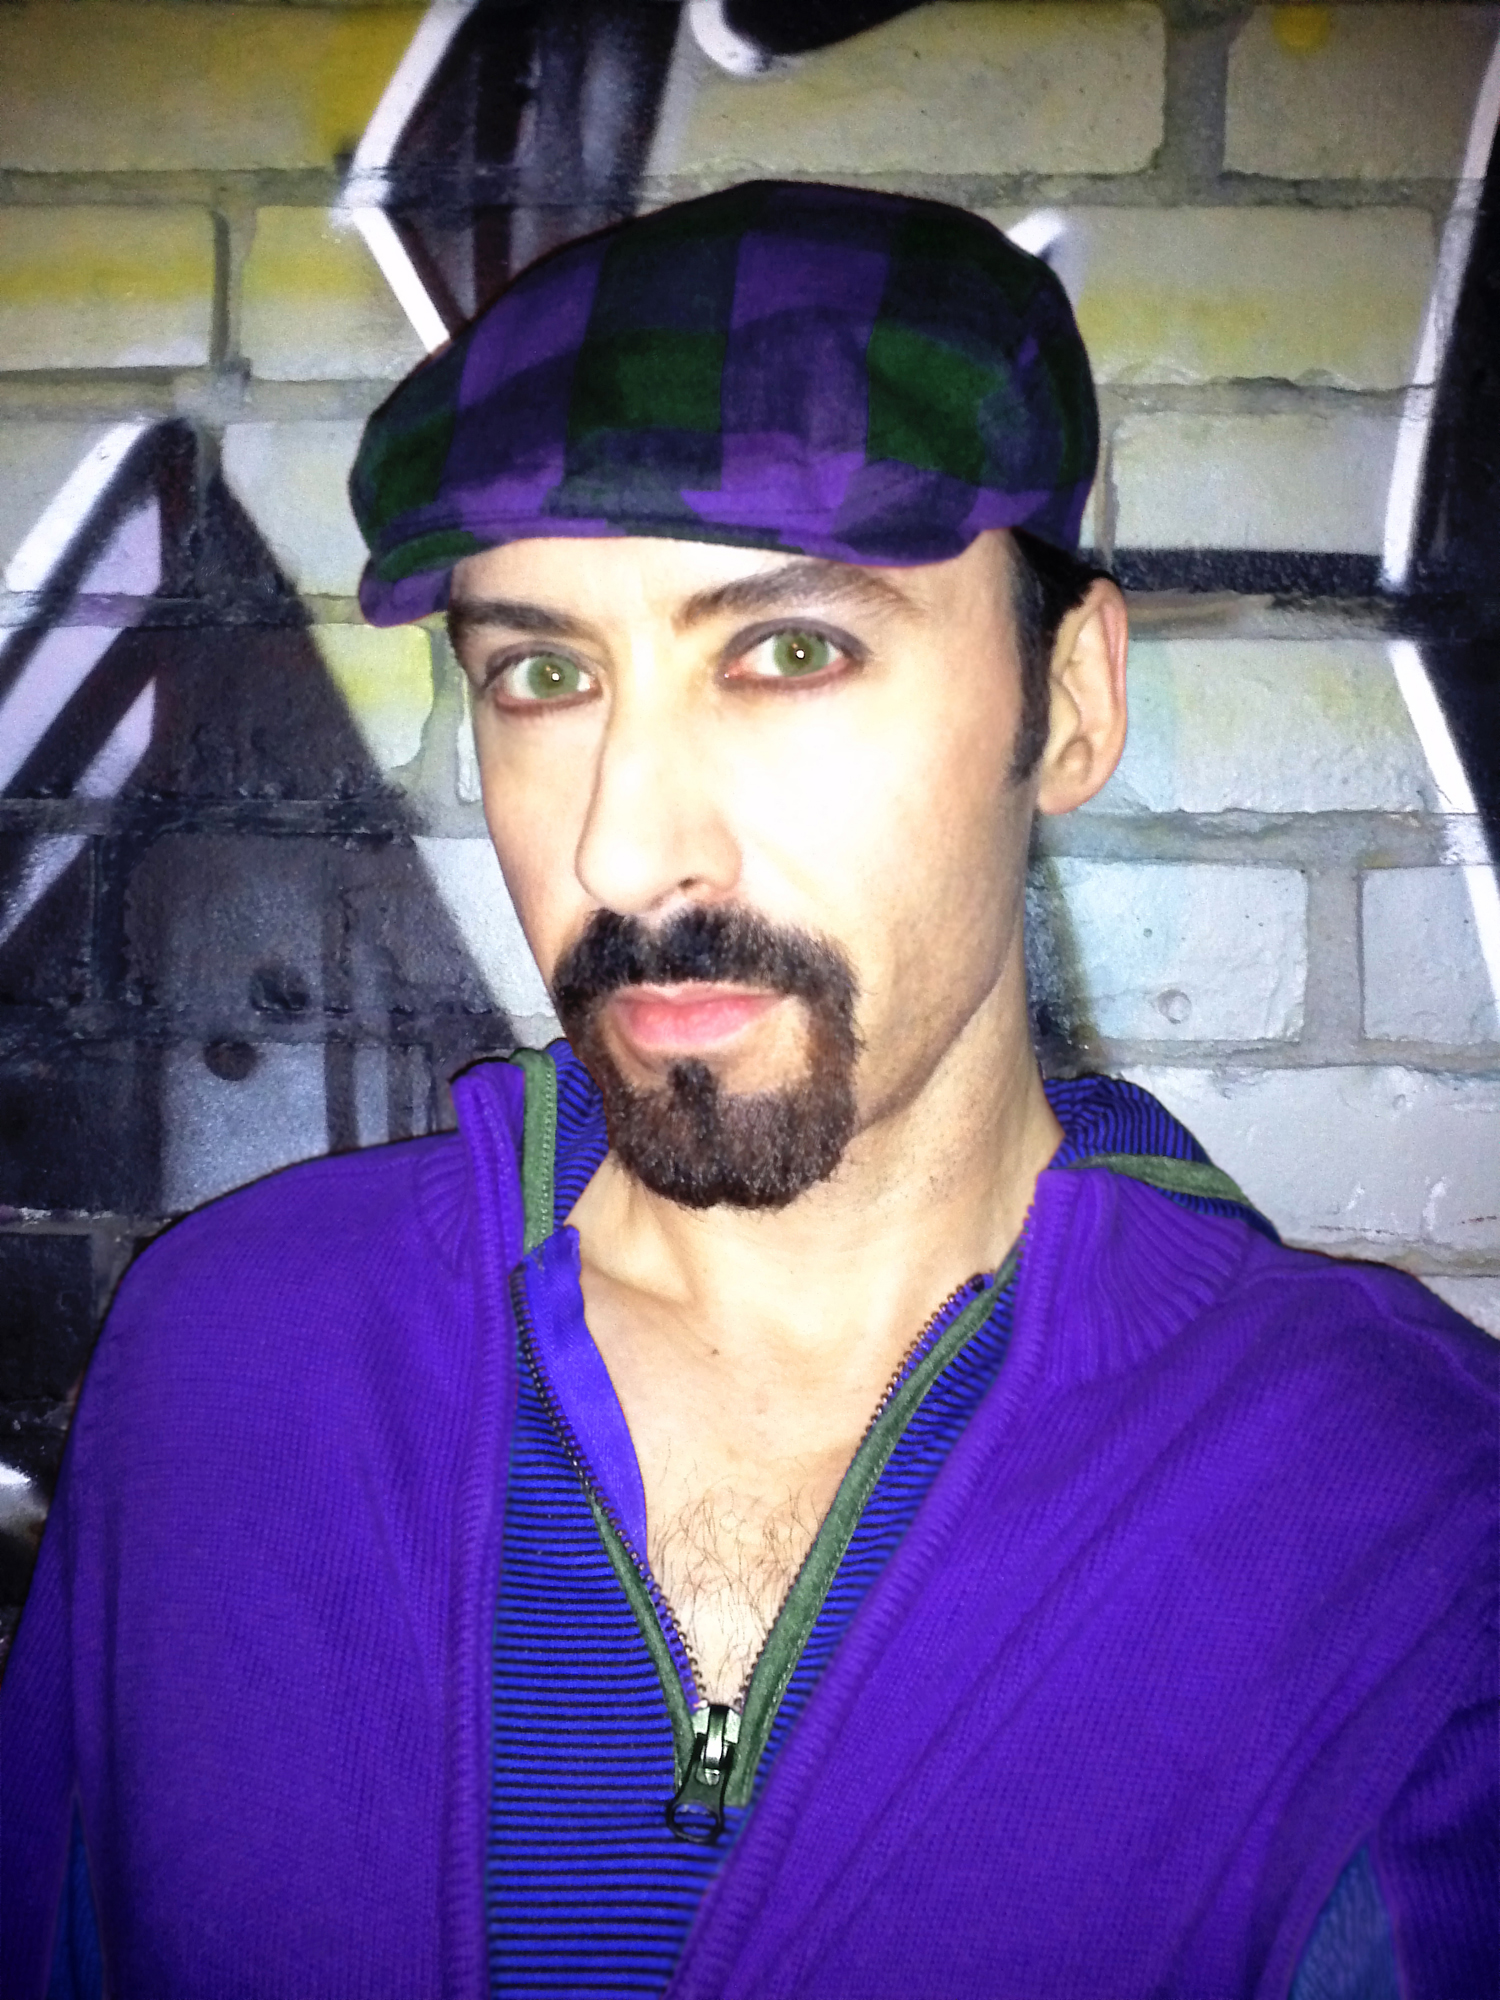 Would I ever go back to the #goatee like in this #ThrowbackThursday #Selfie? I had it for 22 years and that's enough so it's #beard or nothing from now on. #Change #Beard #MoonDazeTV #Season03 #ComingSoon #RealityShow #LifeIsGood